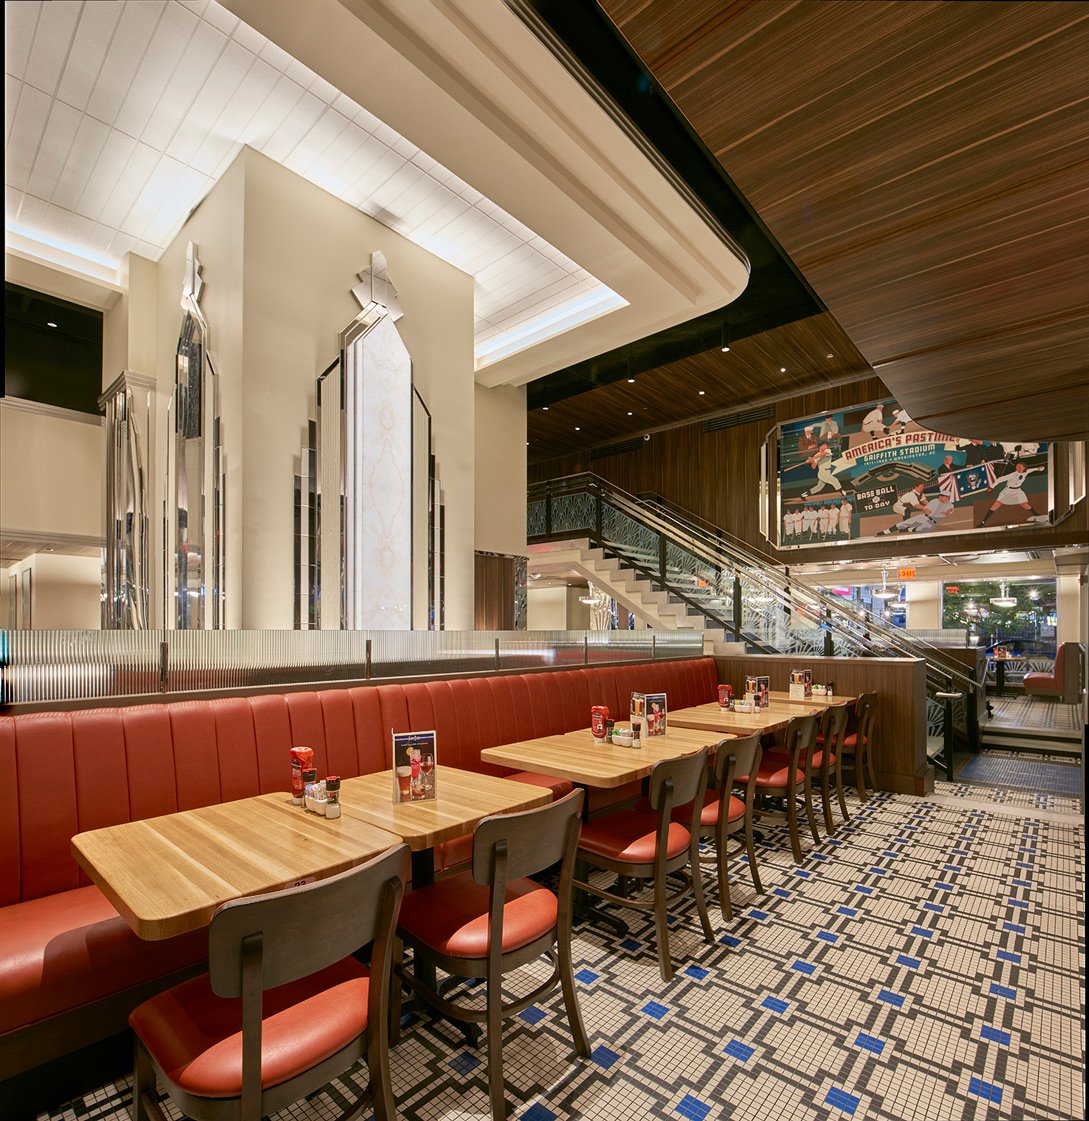 Washington-DC-aerial-view-of-restaurant-interior-with-elongated-red-leather-booth-lined-with-tables-and-facing-chairs